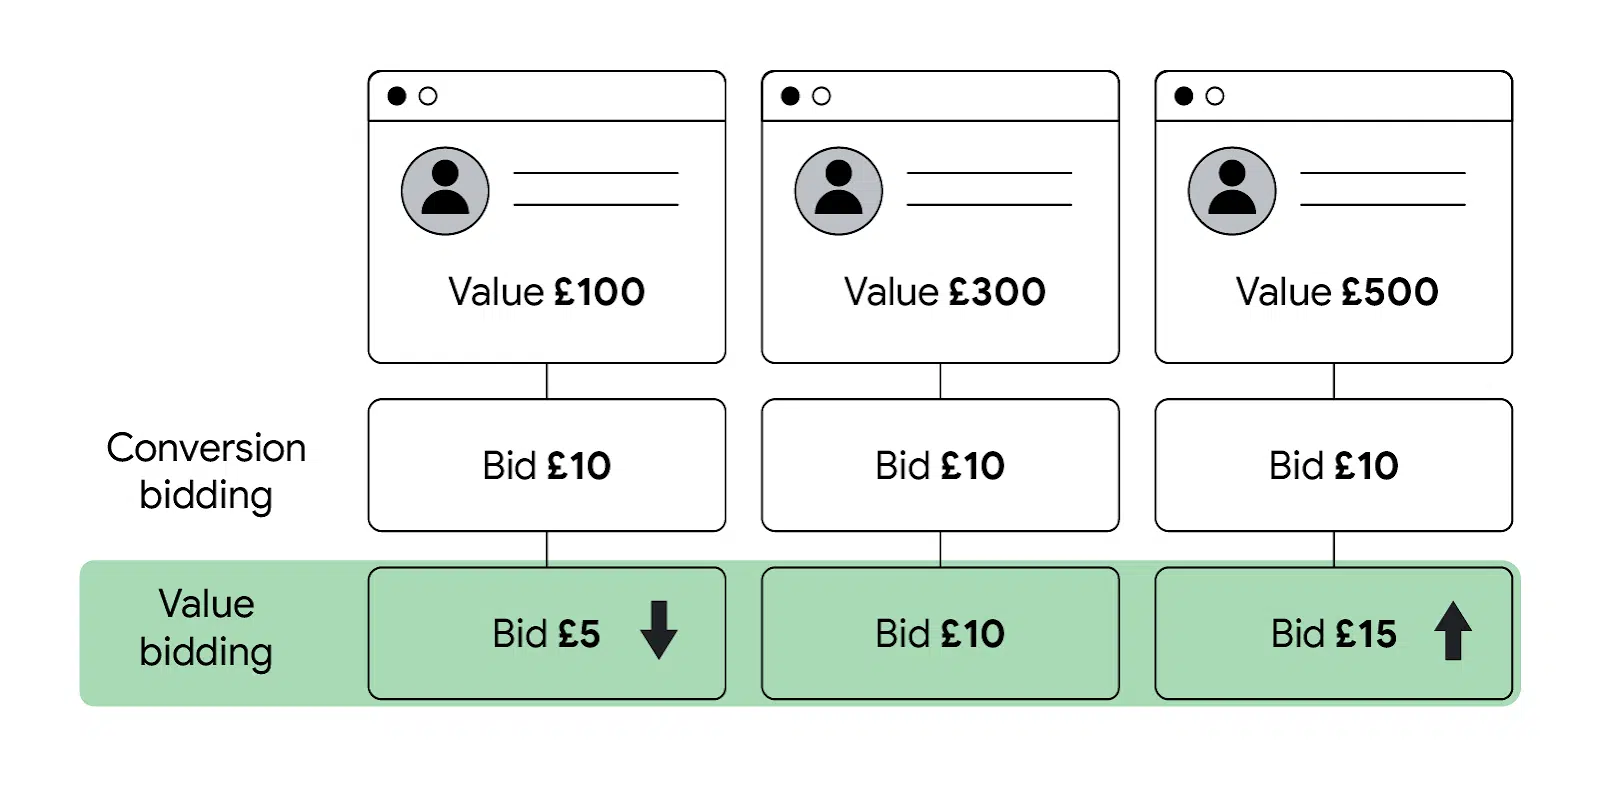 An example of value-based bidding. Three values are attributed to three different customers: £100, £300 and £500. Under conversion bidding, companies bid £10 each. Under value-based bidding, companies would bid £5, £10 and £15 respectively.